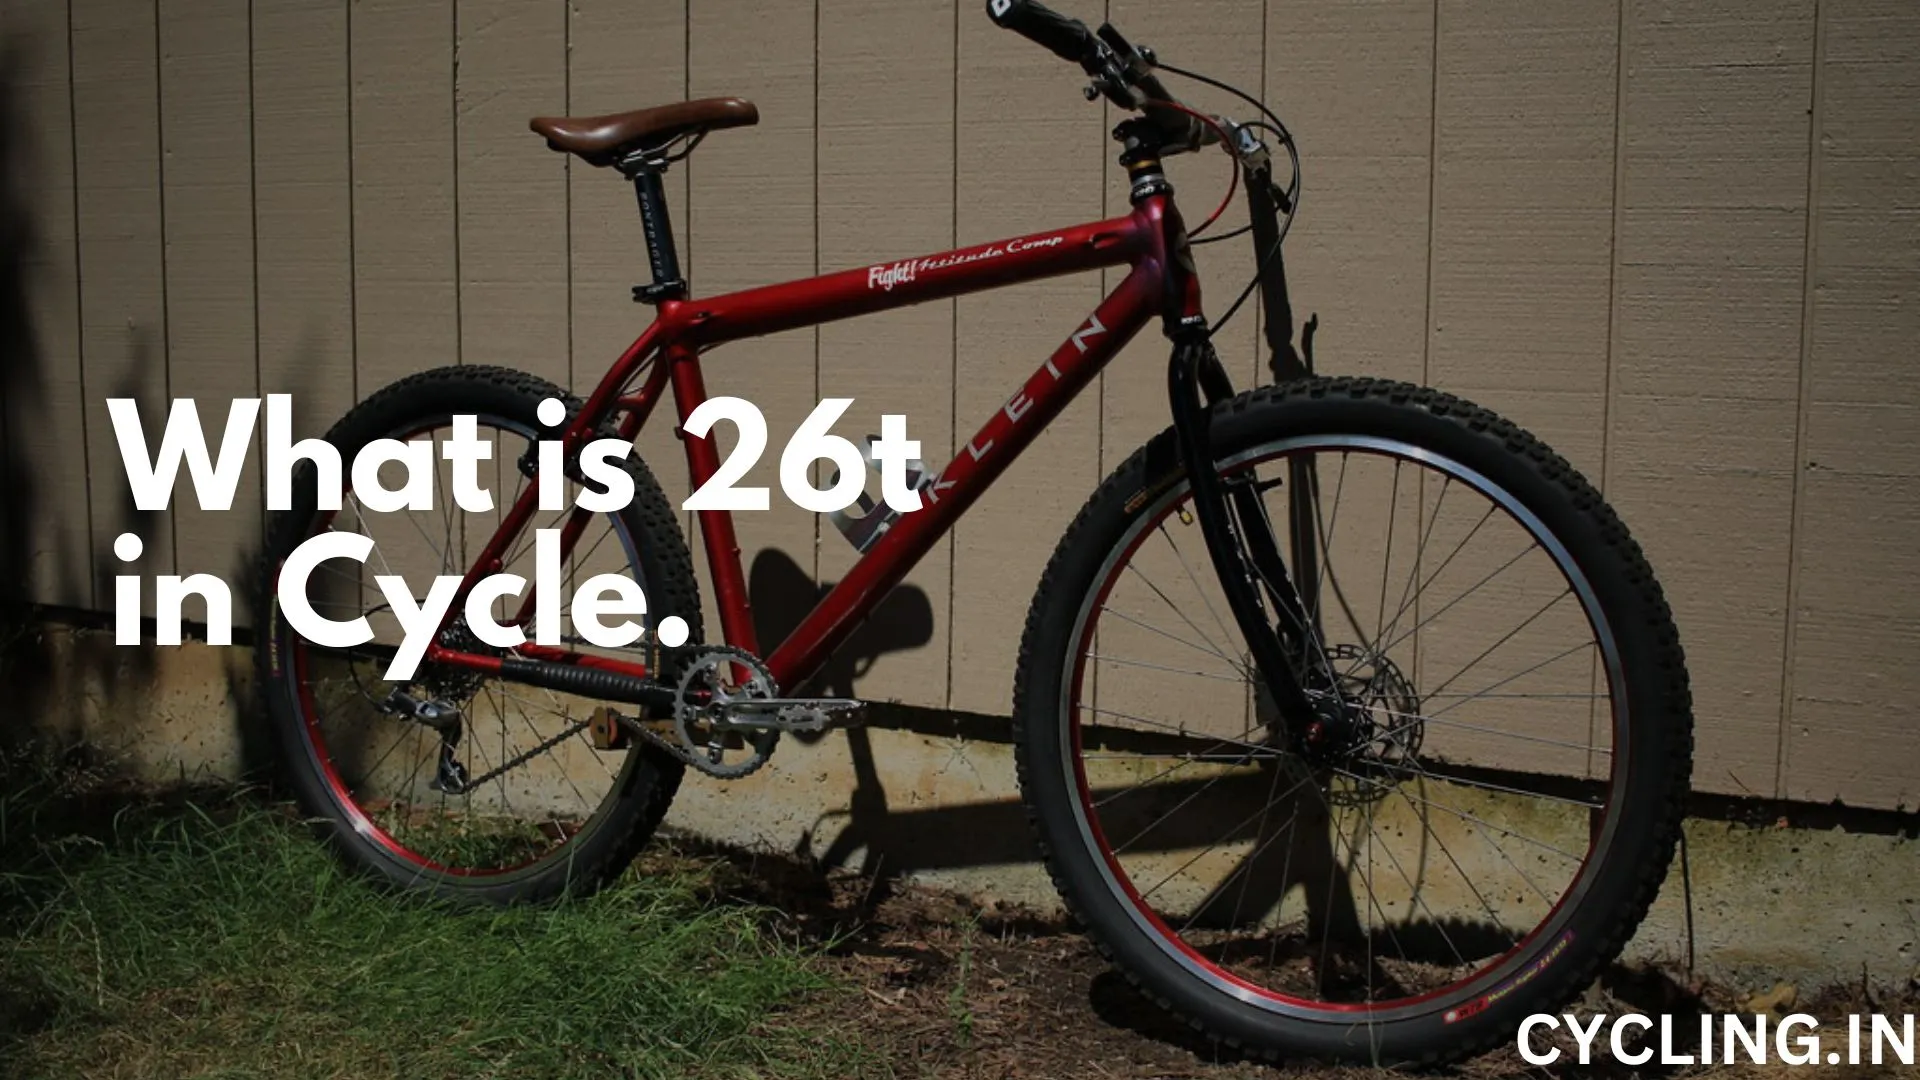 What is 26t in cycle - An Old Red Klein Mountain Bike standing next to a Wall.